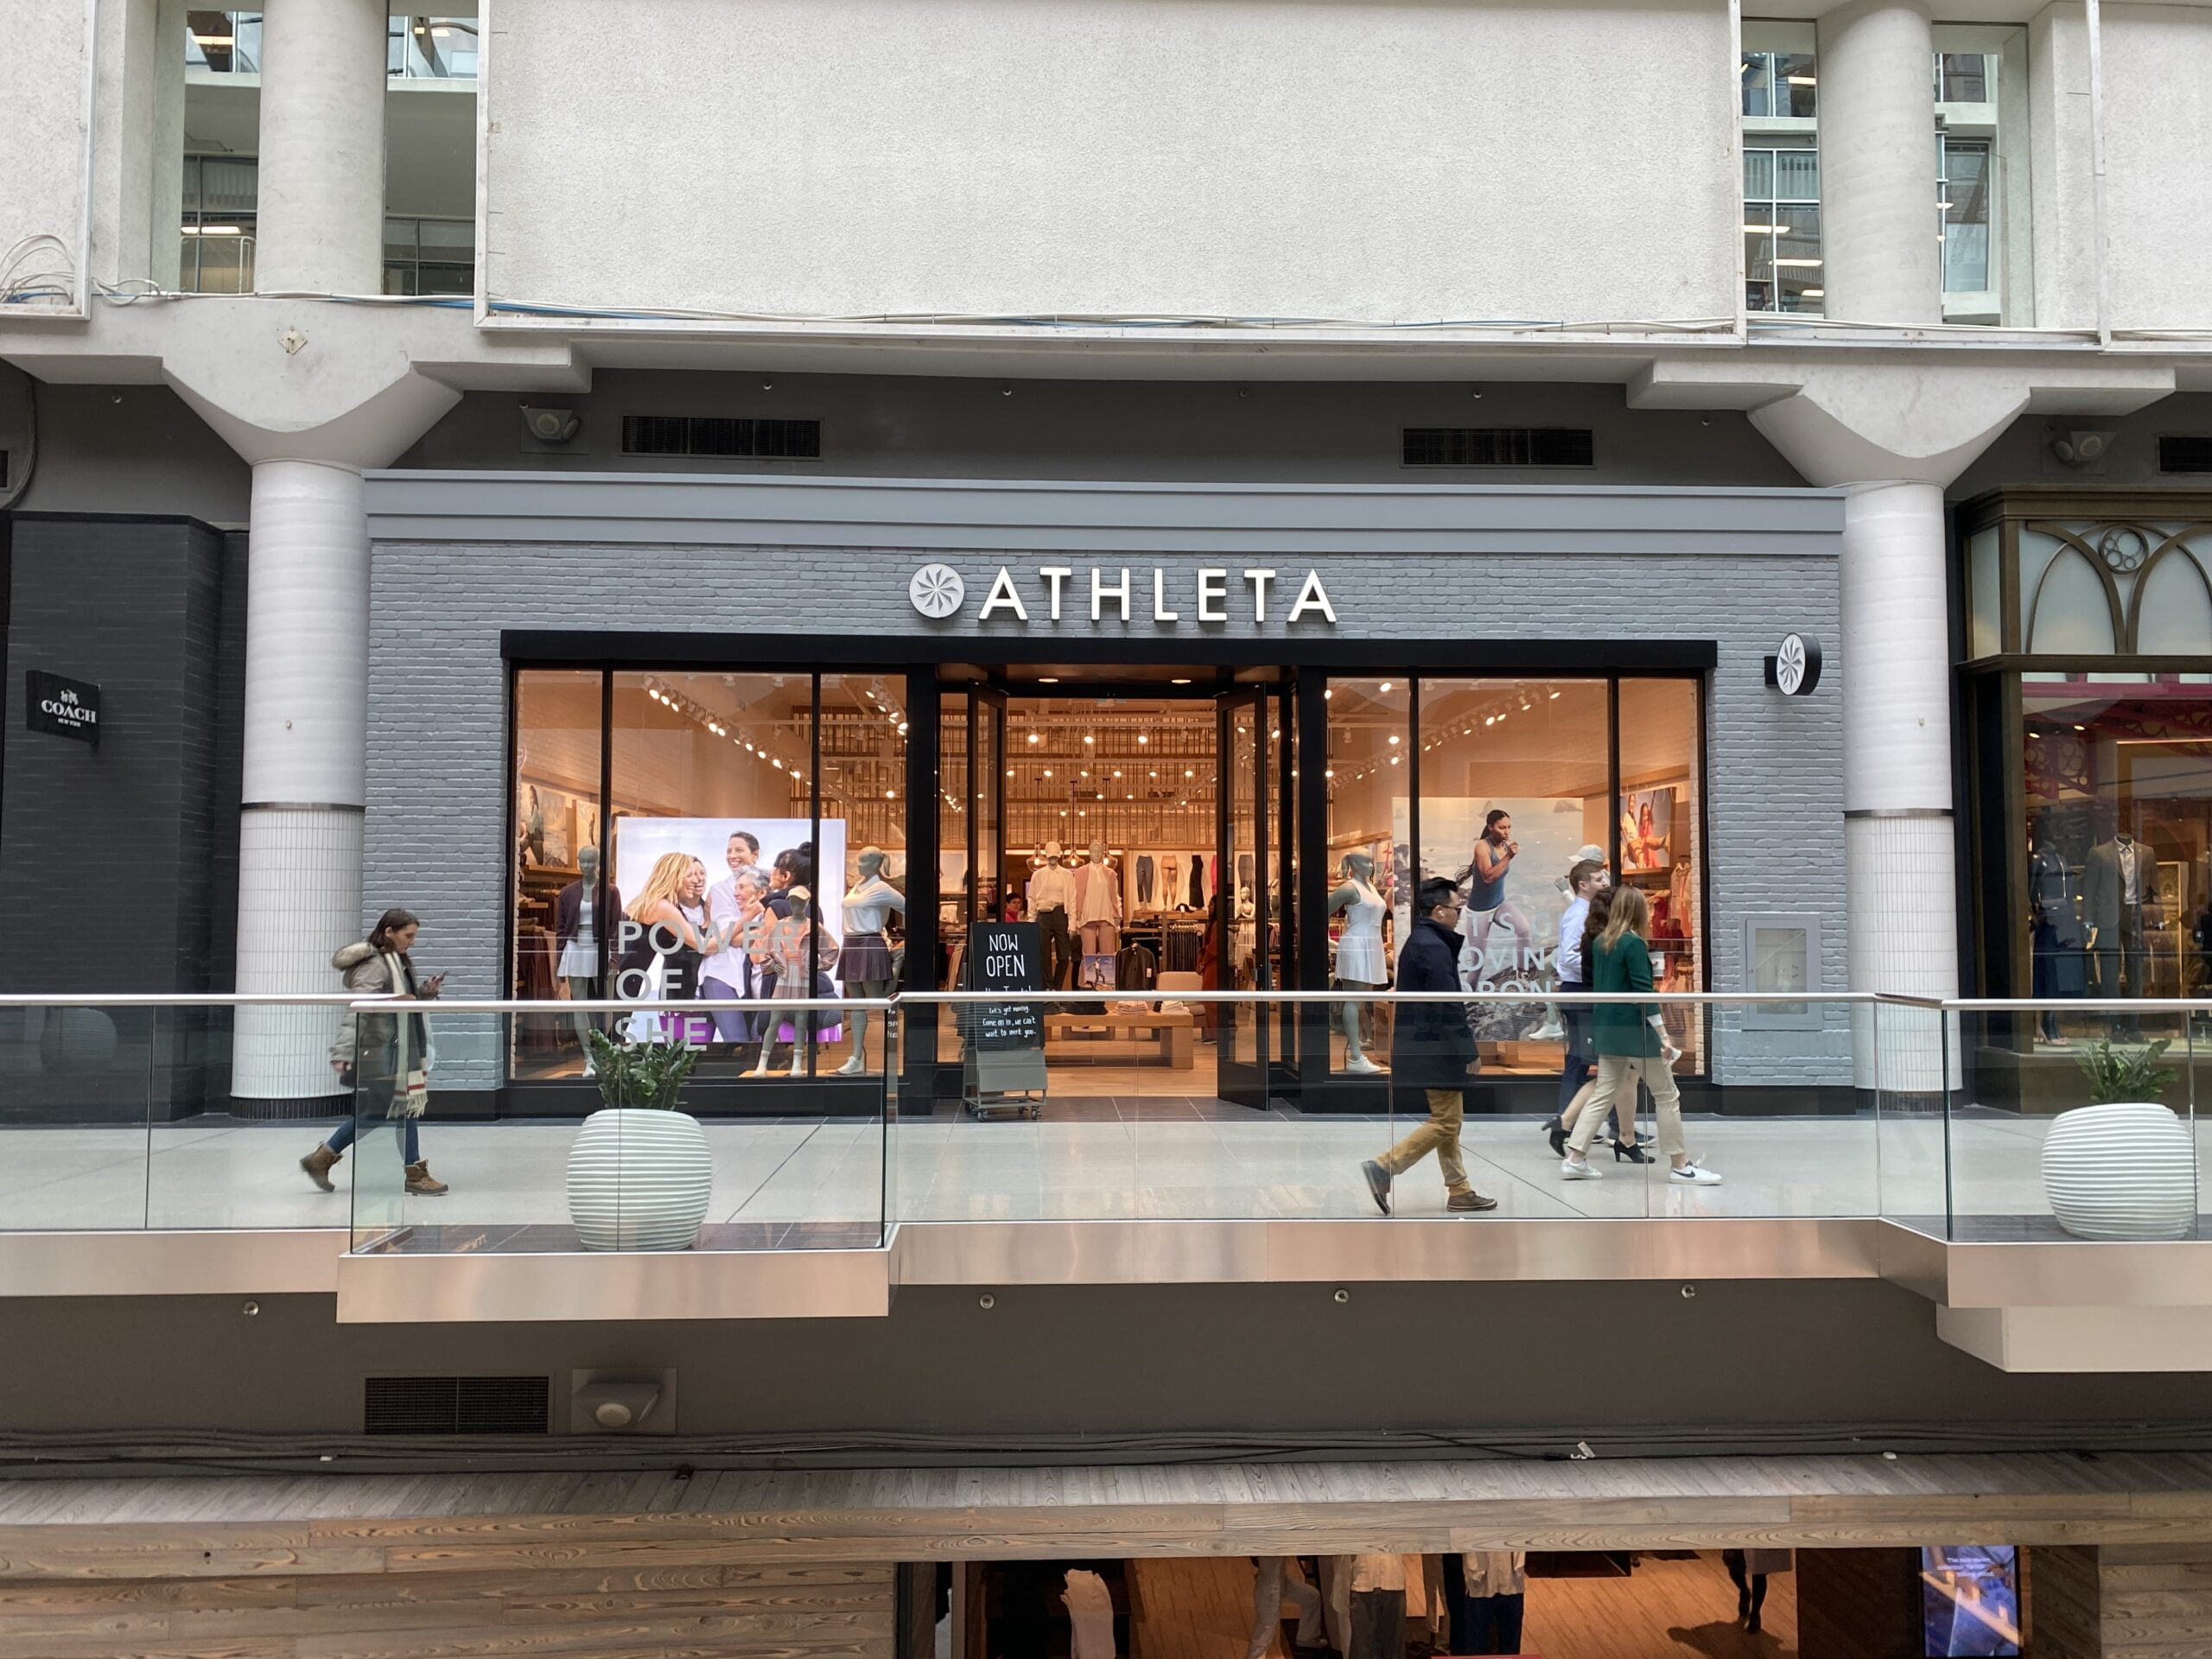 New & Notable: Latest launches from Athleta, Knix, Away and more